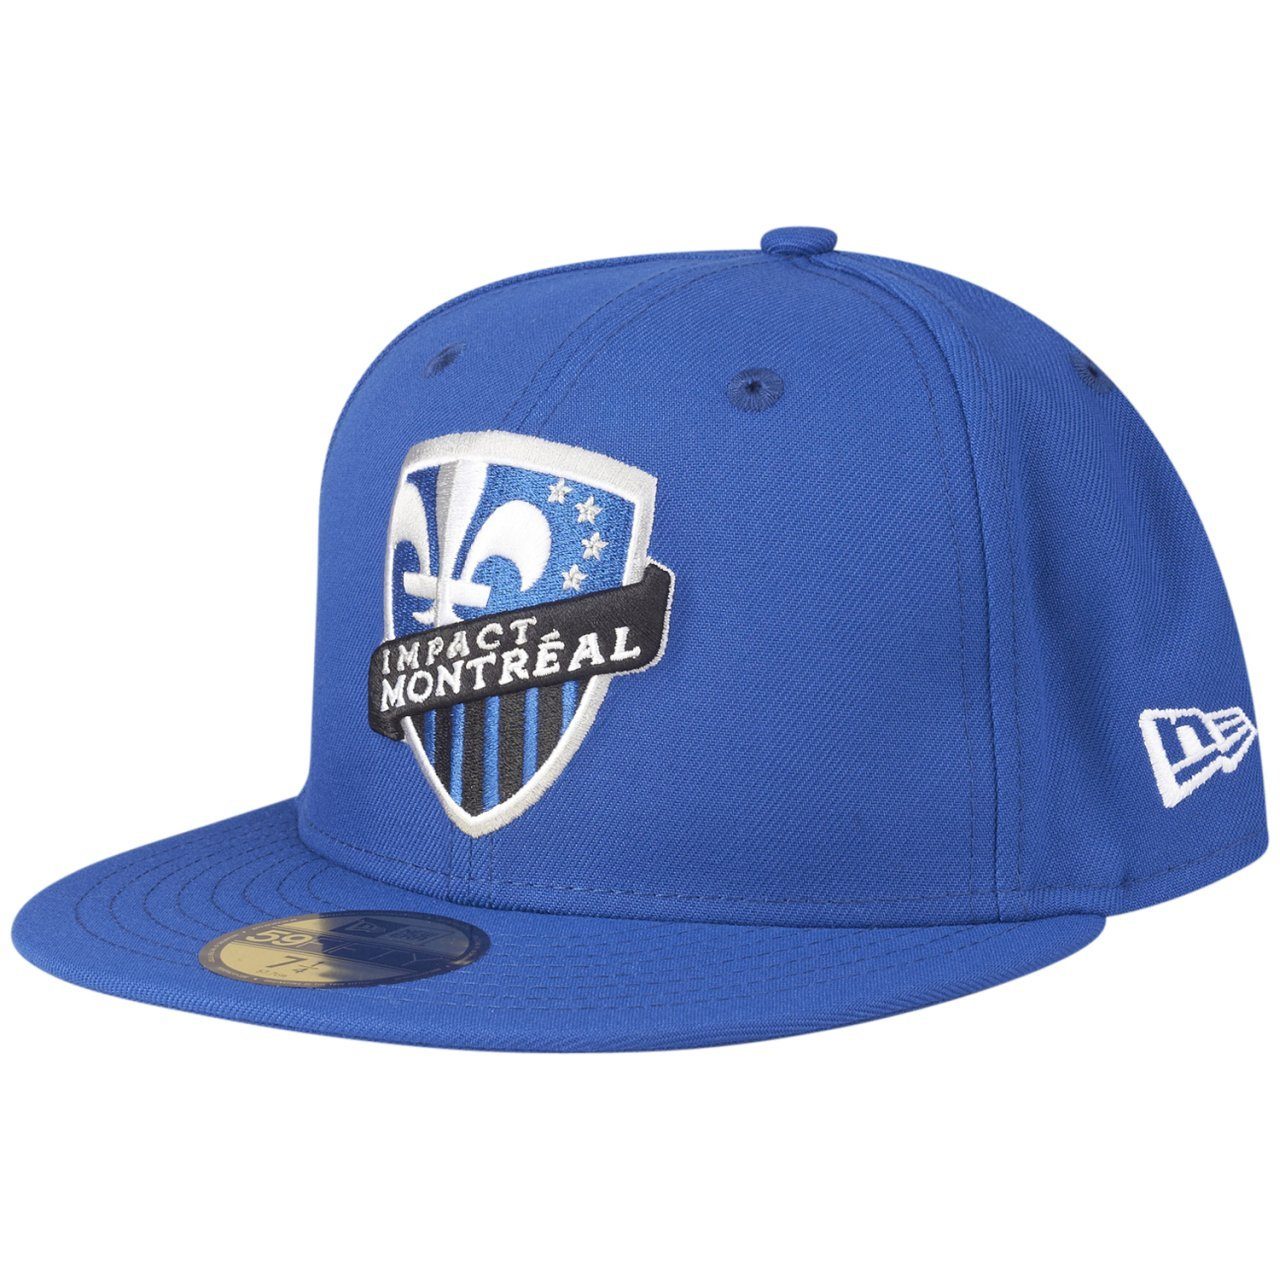 Fitted MLS 59Fifty Cap Montreal New Impact Era